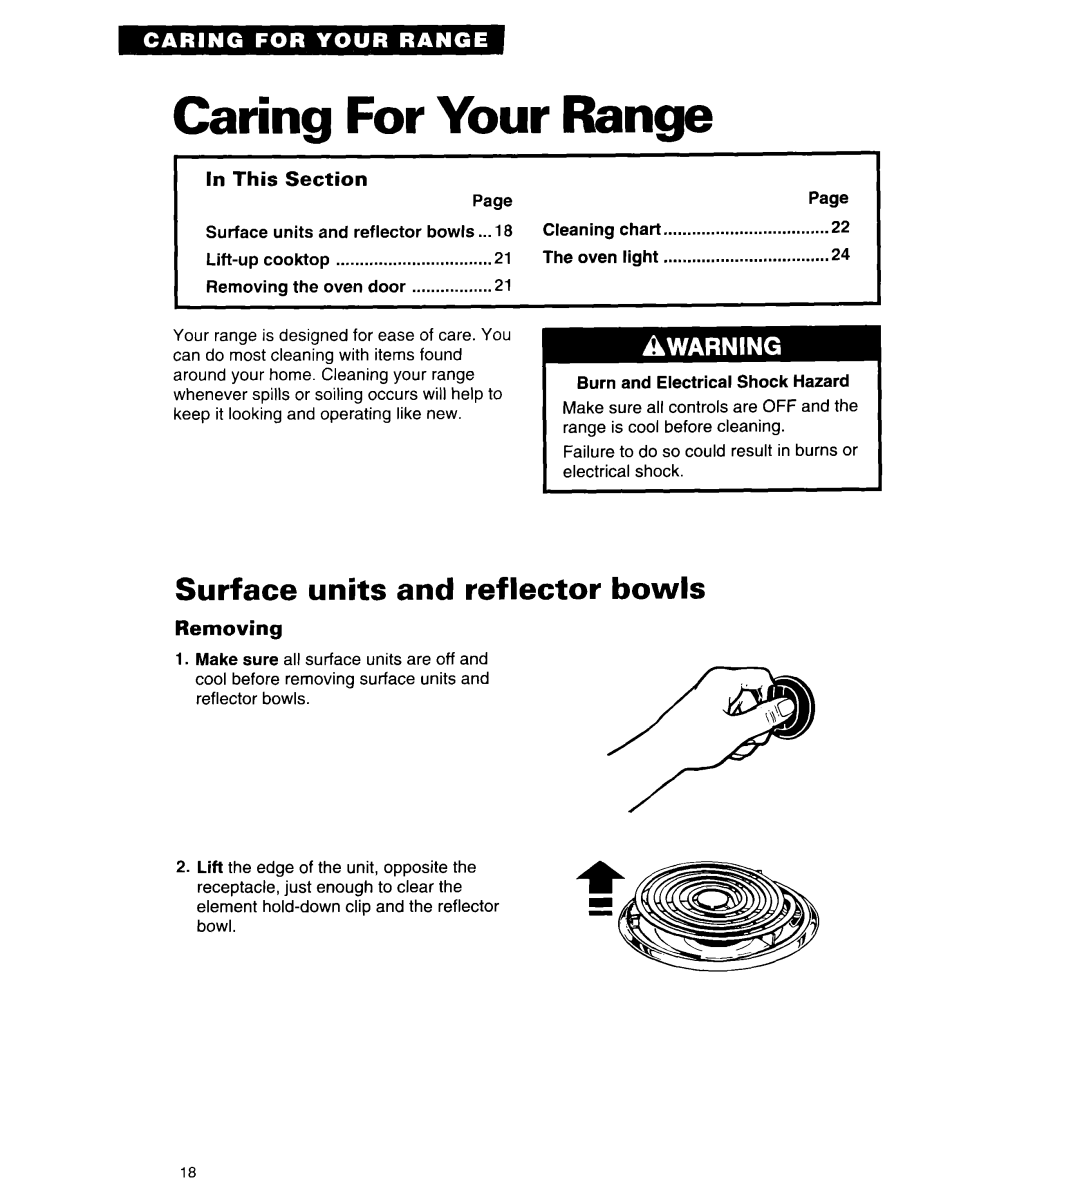 Whirlpool RF310BXY Caring For Your Range, Surface units and reflector bowls, In This Section, Removing 